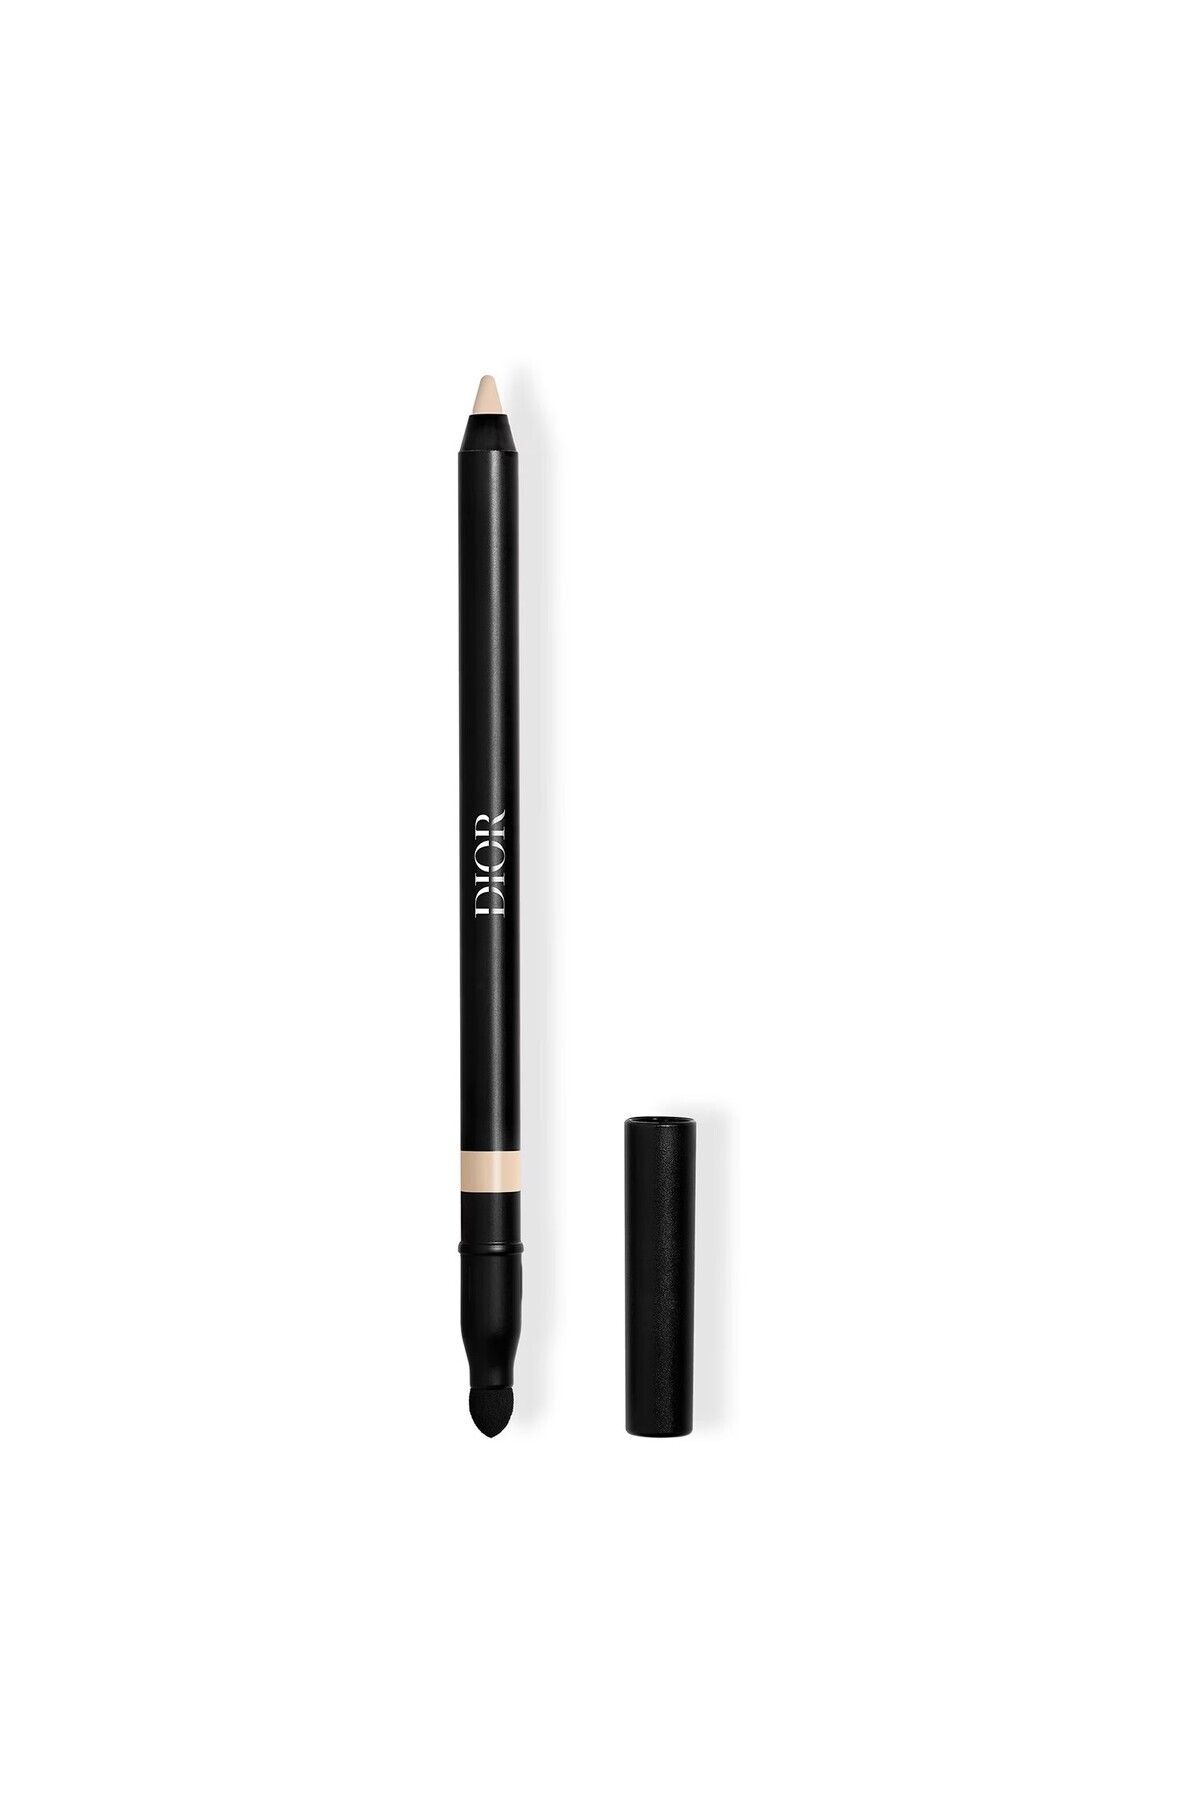 Dior DİORSHOW KOHL - SMUDGE-PROOF, İNTENSE COLOR, WATERPROOF, CREAMY TEXTURE EYE PENCİL PSSN2375